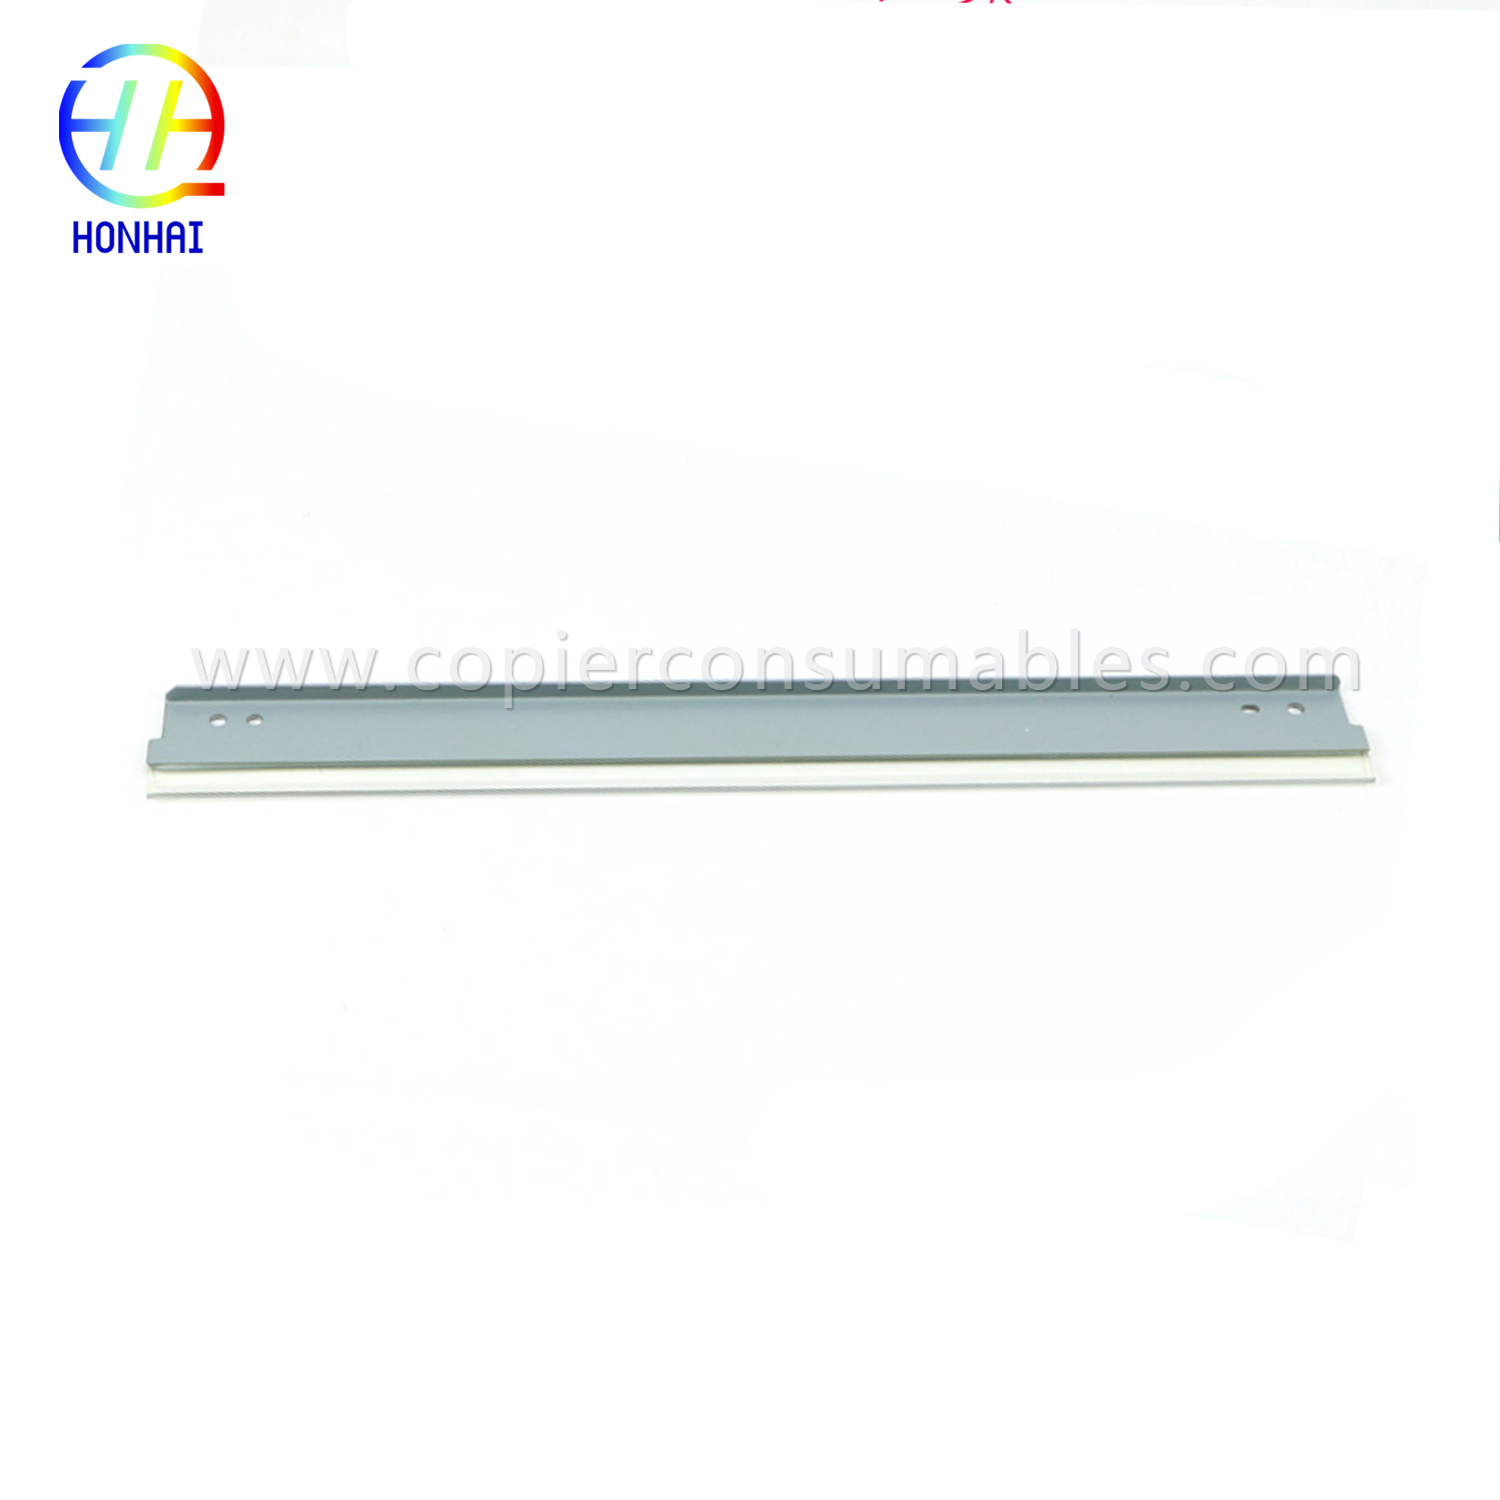 Ibt Cleaning Blade 2ND for Xerox DC700 033K96880 OEM  (1)